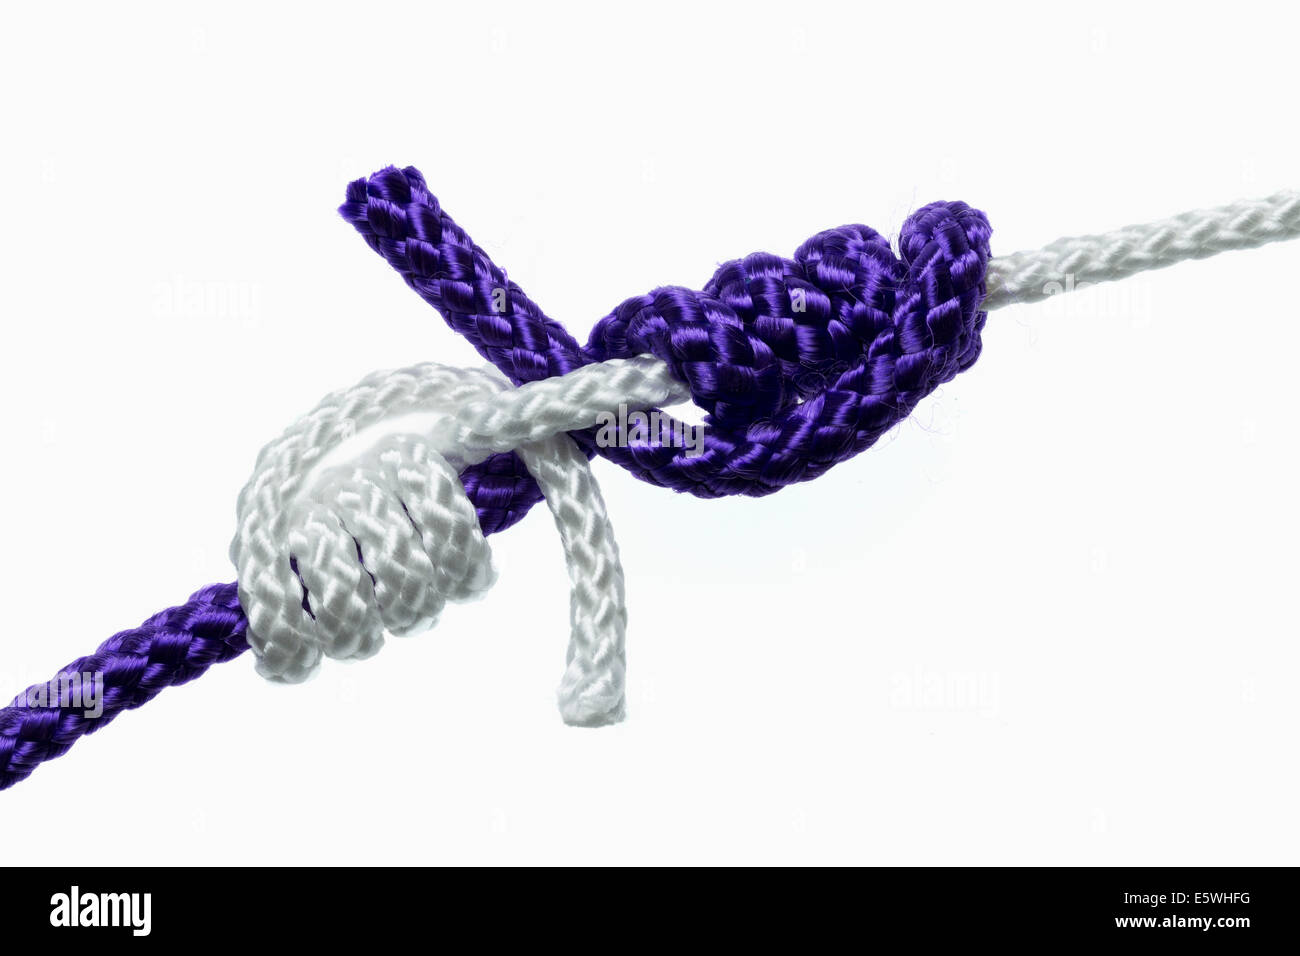 A Blood knot - a fisherman's knot used to tie similar types of line or rope together Stock Photo